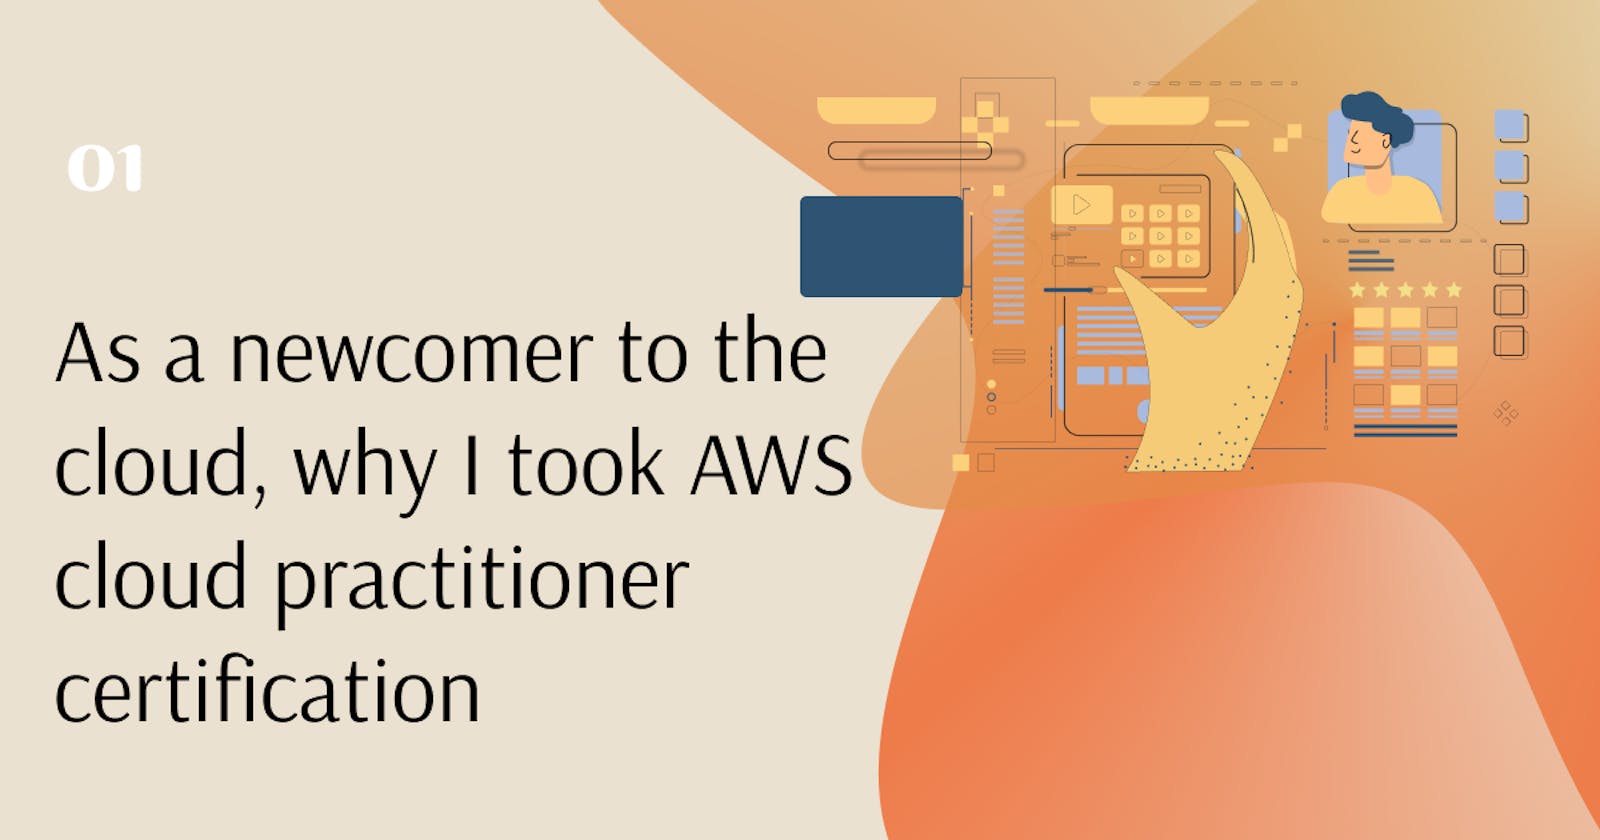 As a newcomer to the cloud, why I took AWS cloud practitioner certification